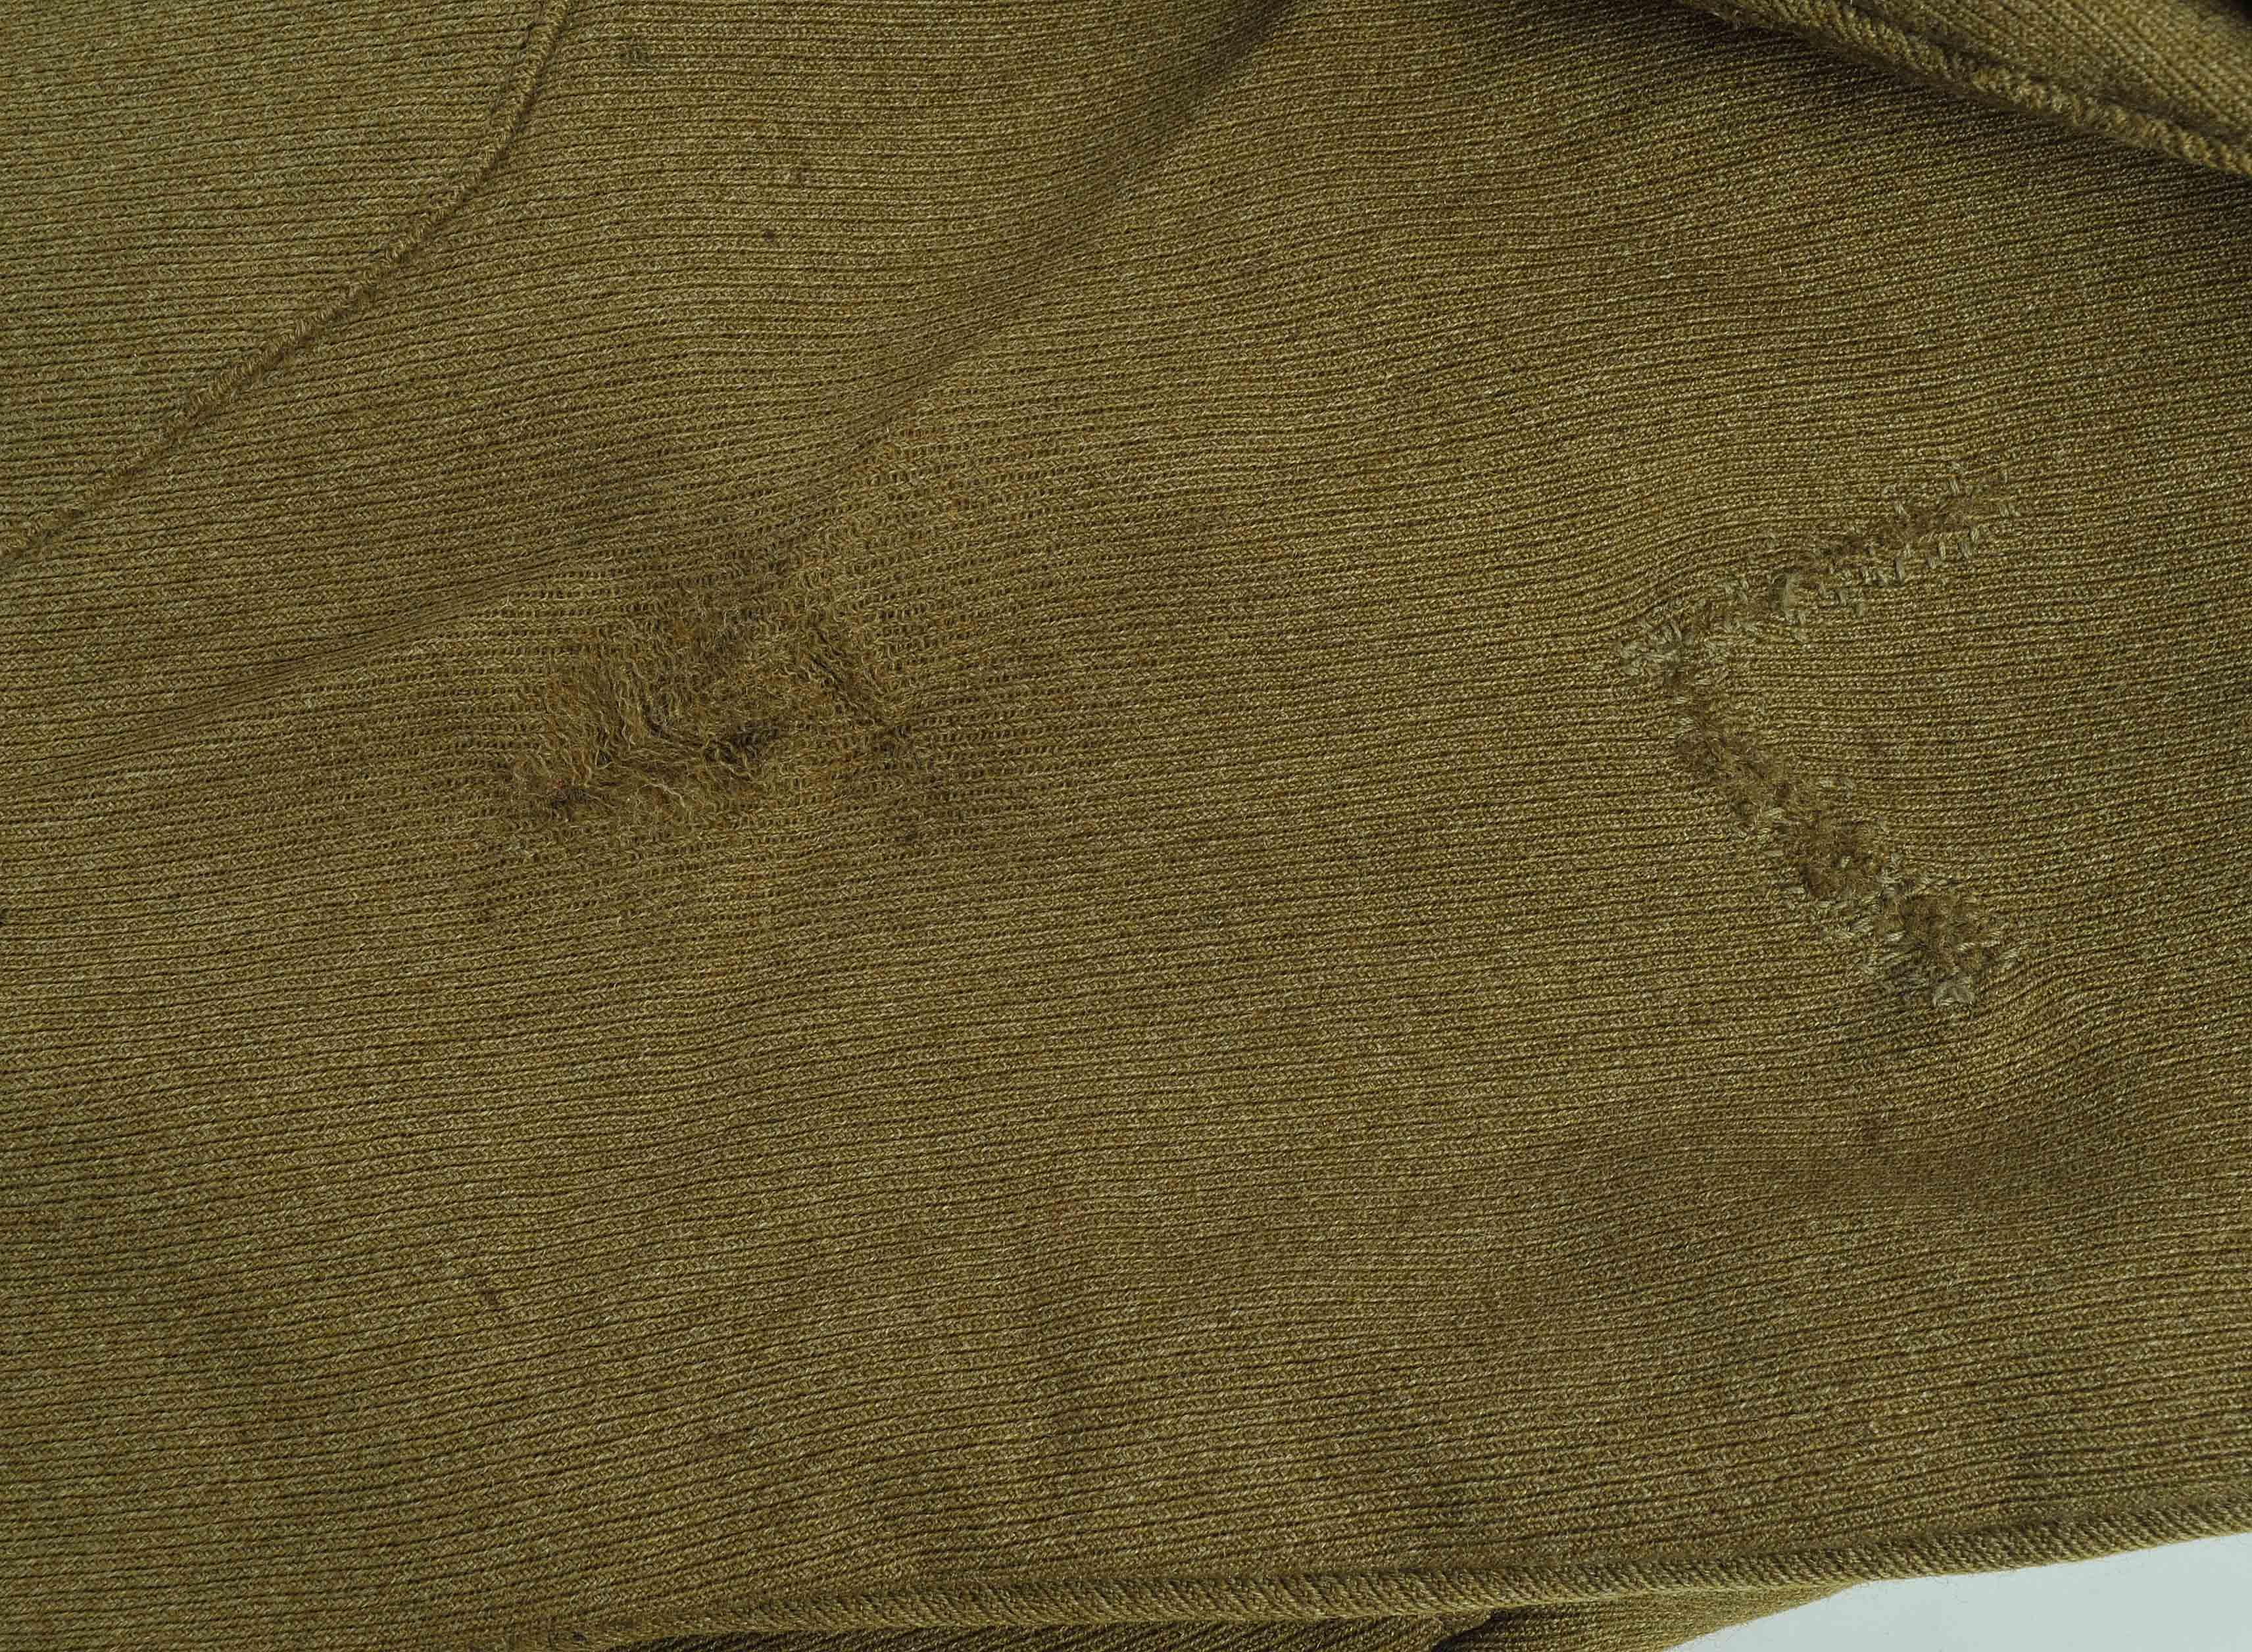 RARE US Army WWI issued 1st Infantry Division Uniform Grouping of an Octagenerian (HRT)